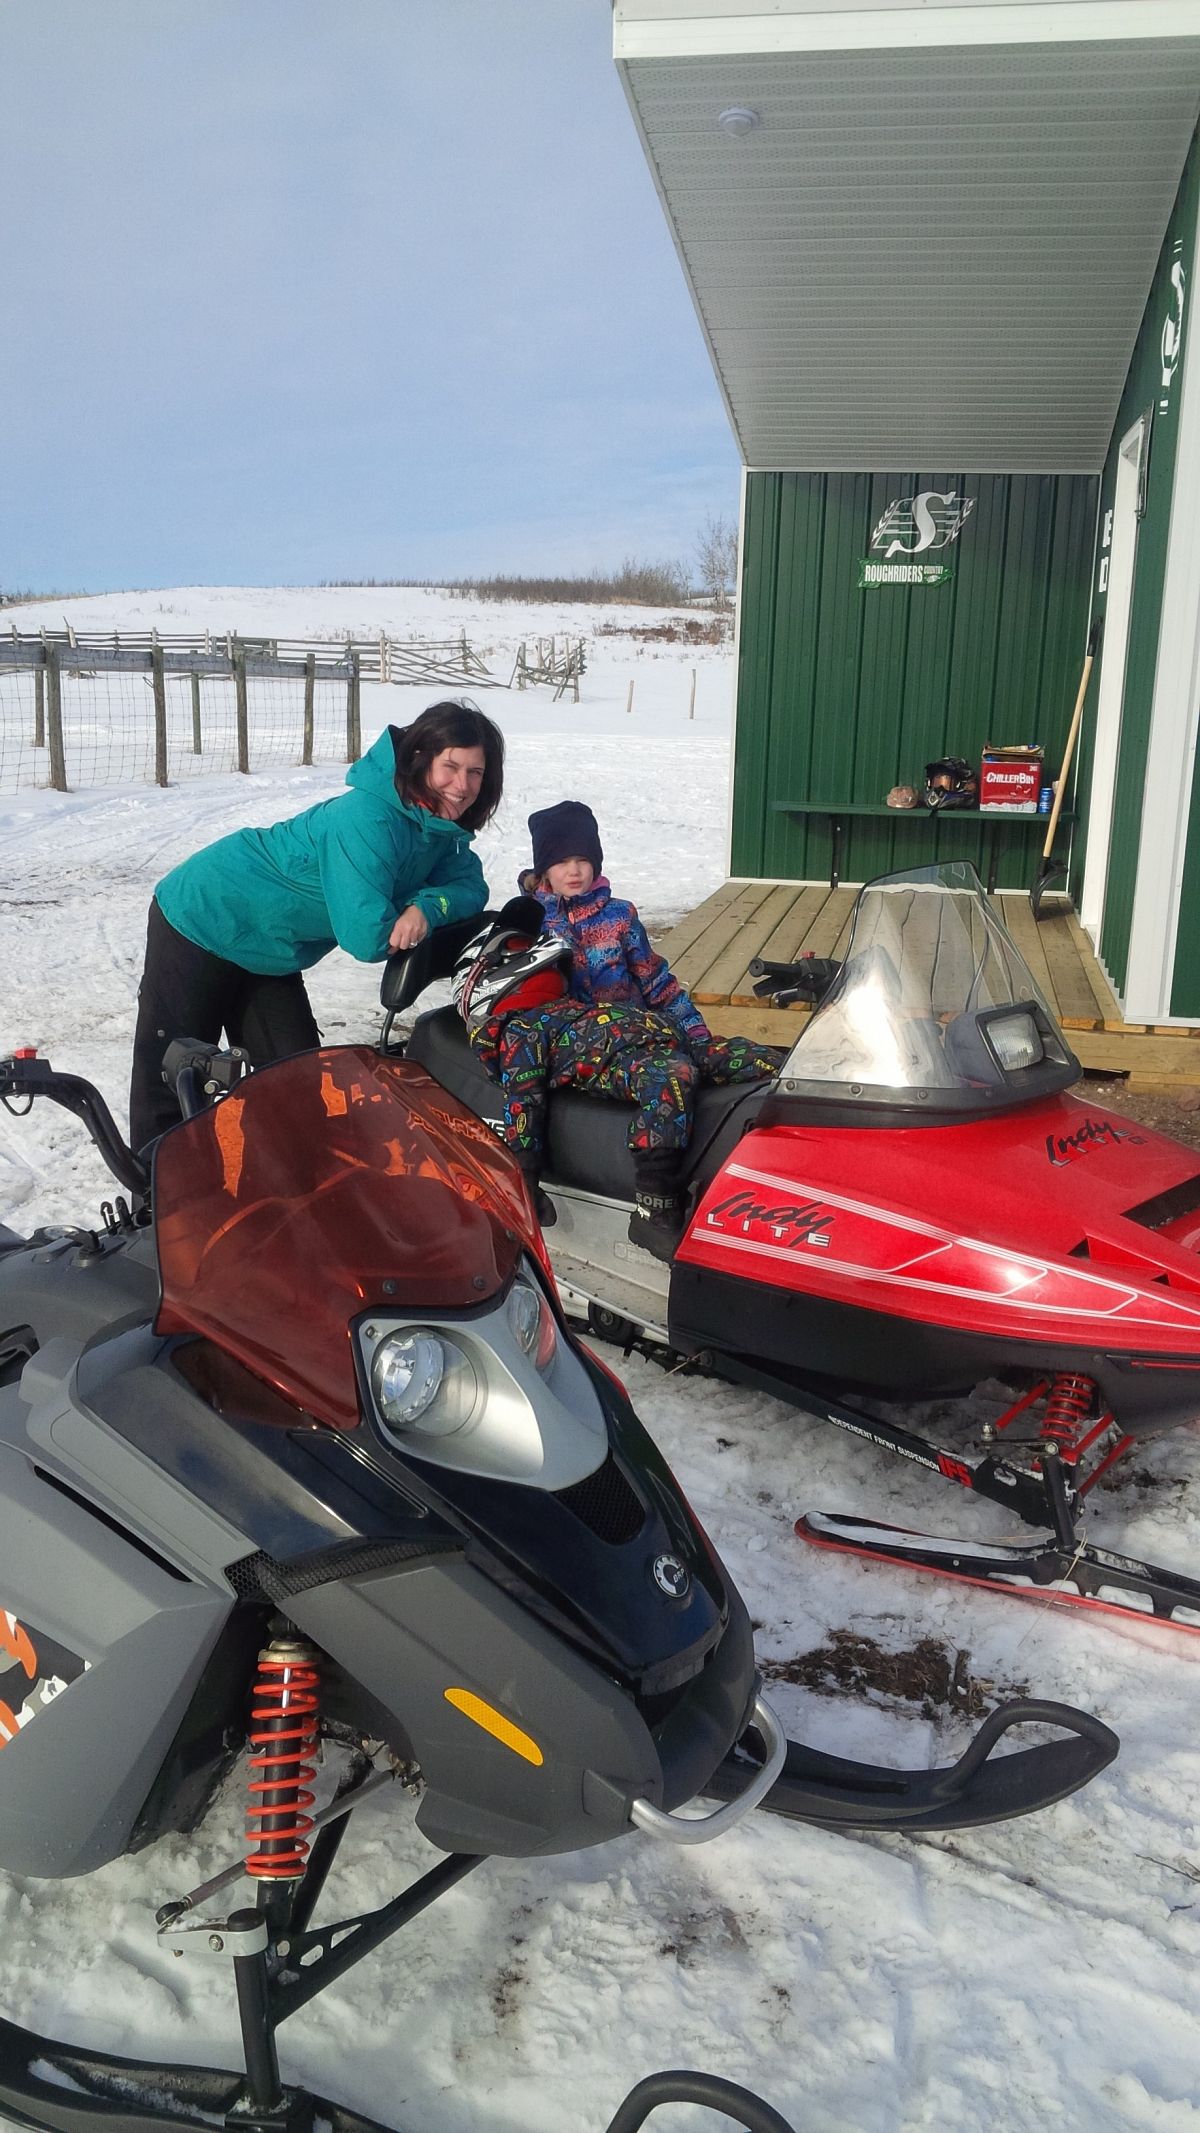 First sled trip to new Riders Hut... very fancy!